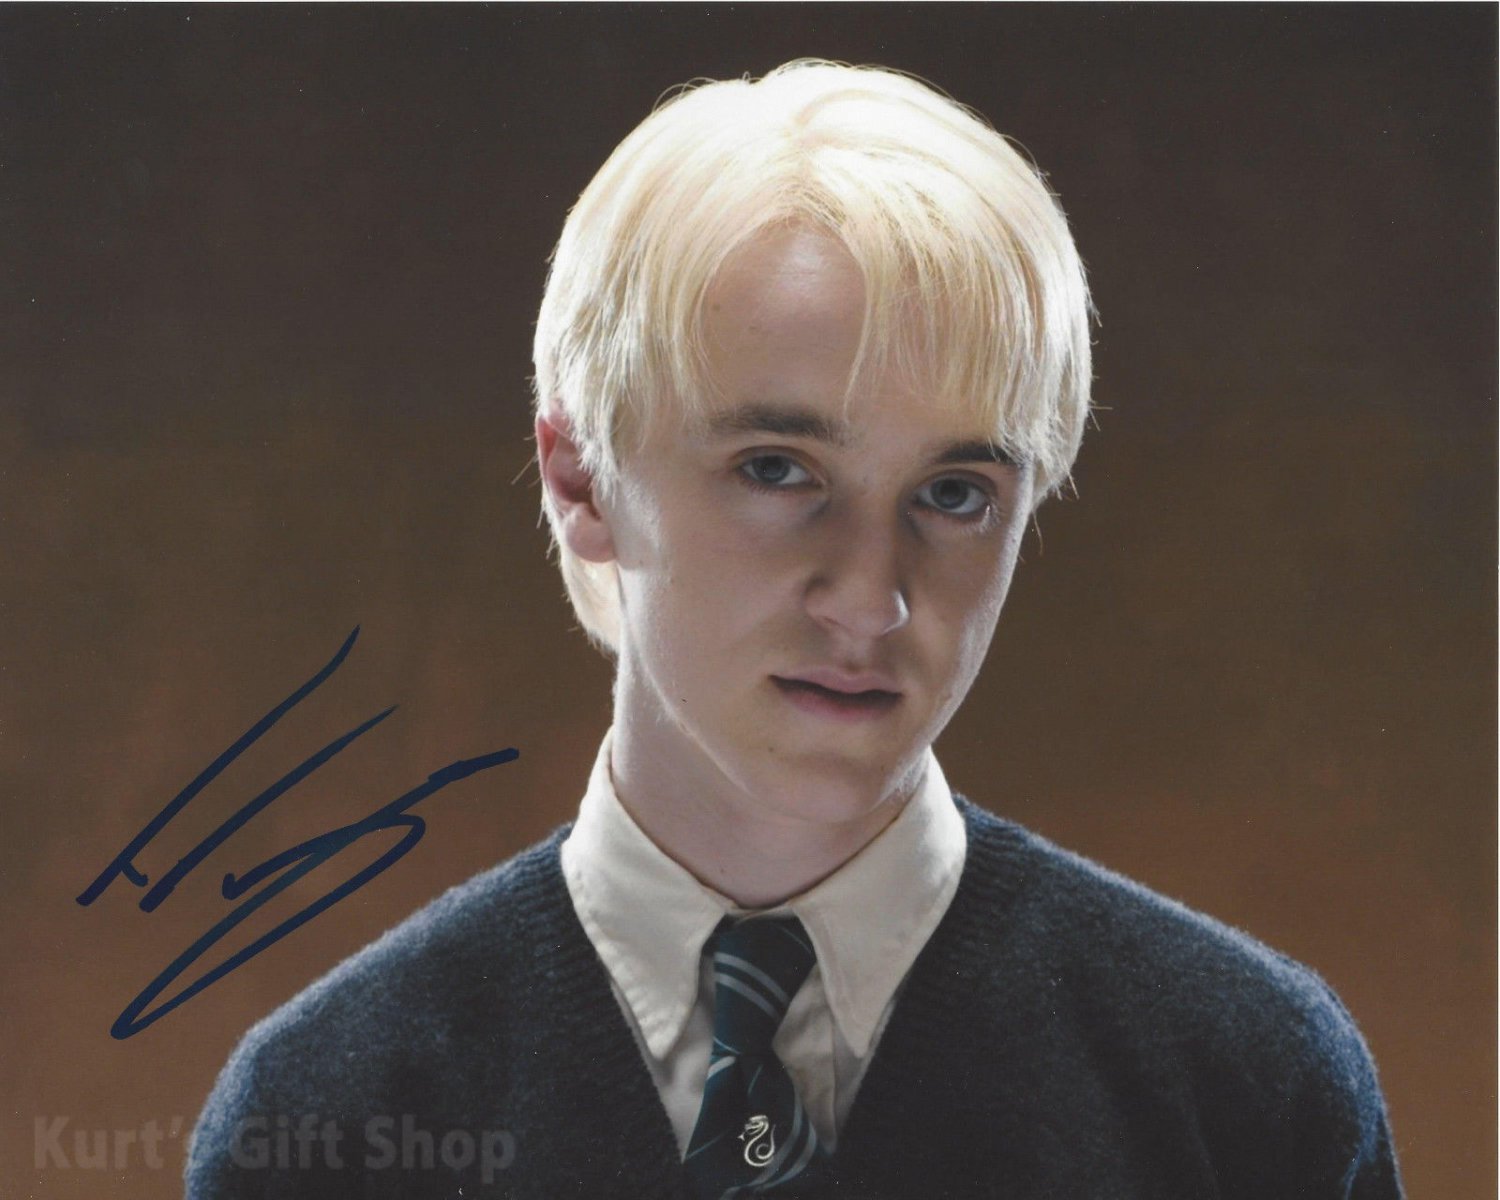 Tom Felton Harry Potter Awesome 8 X 10" Signed & Mounted Autographed Photo (Reprint #4)